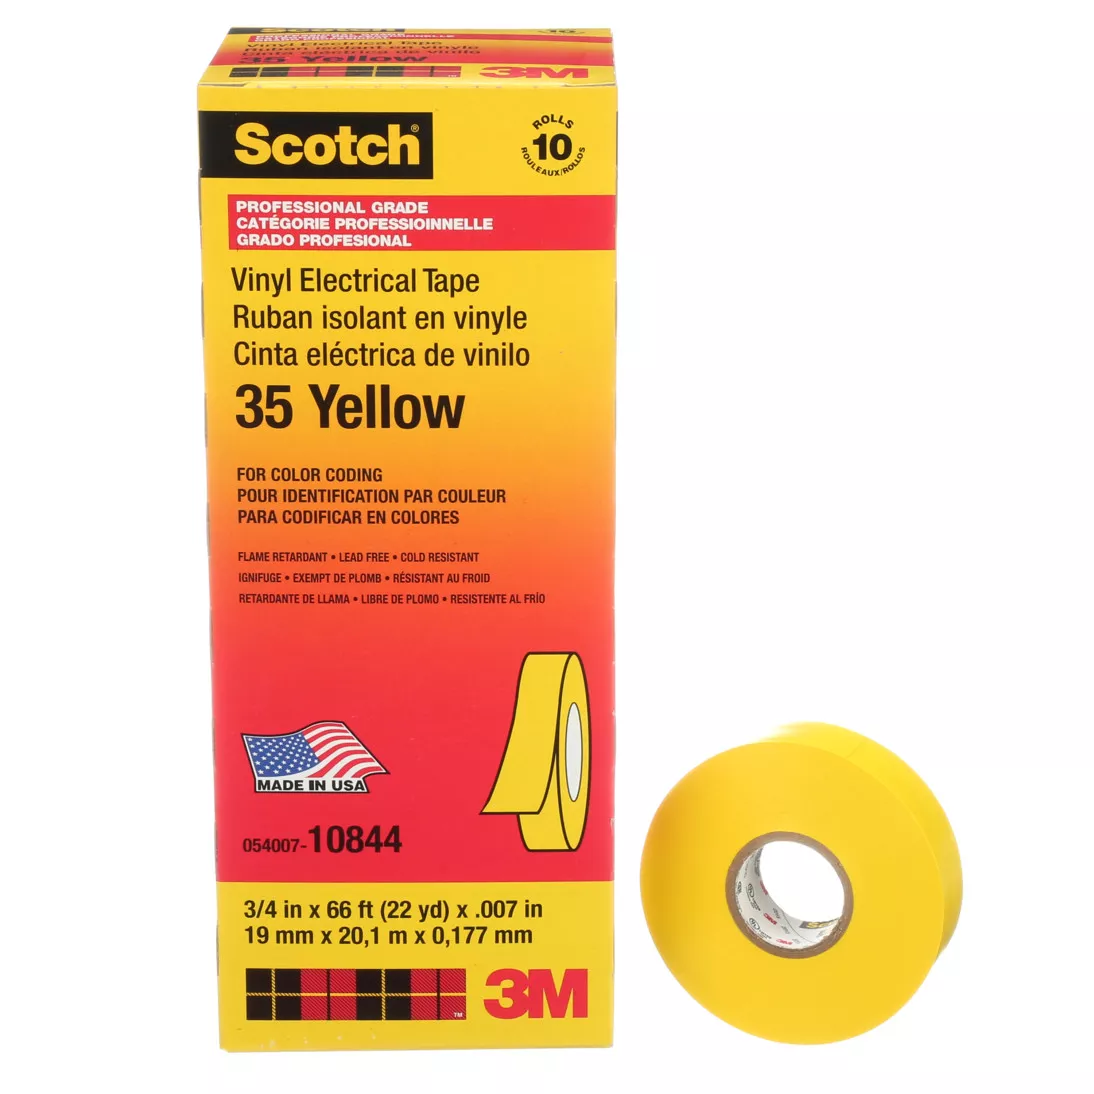 Scotch® Vinyl Color Coding Electrical Tape 35, 3/4 in x 66 ft, Yellow,
10 rolls/carton, 100 rolls/Case